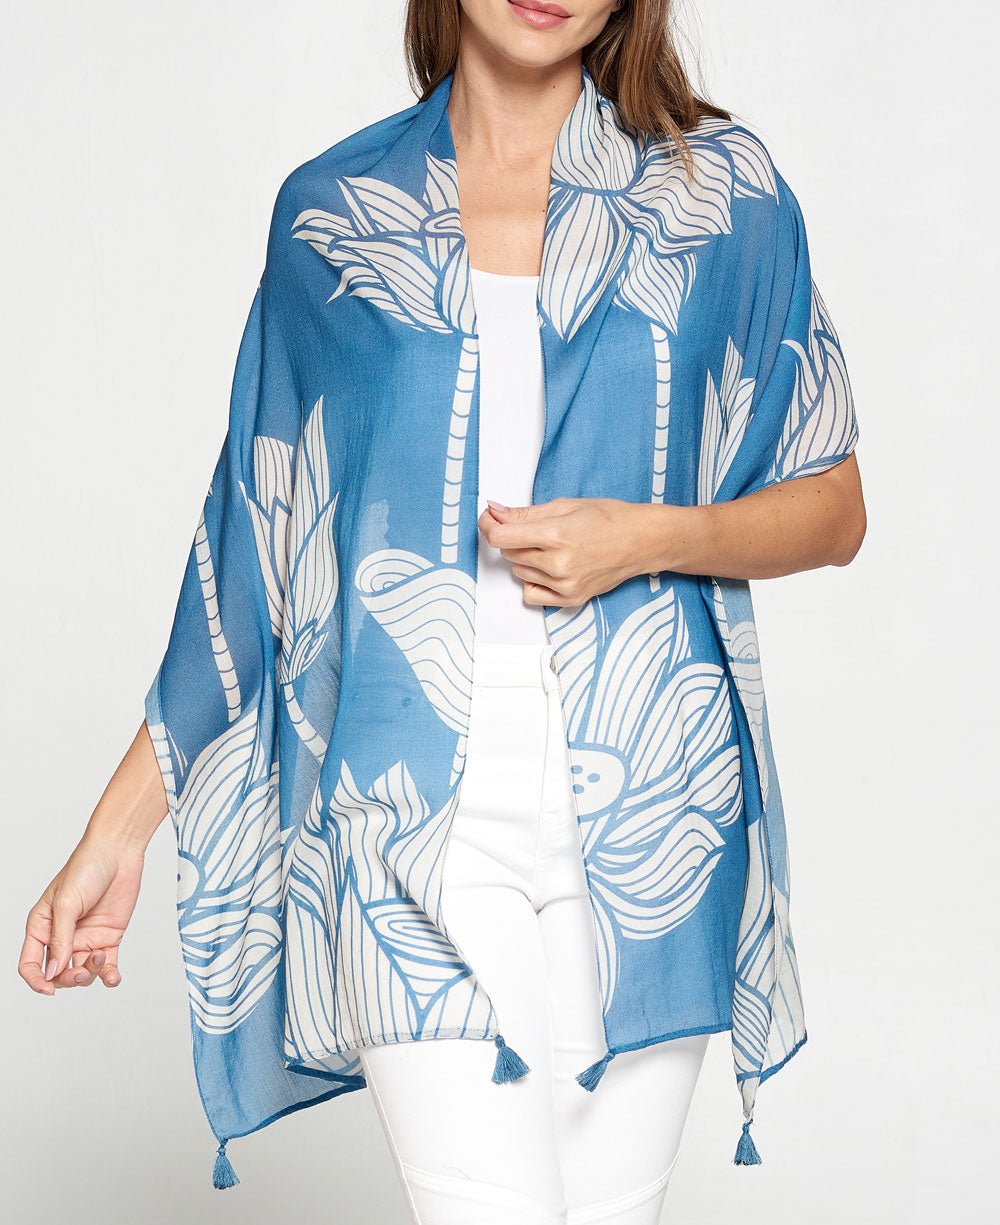 Blue And White Lotus Print Scarf - Scarves